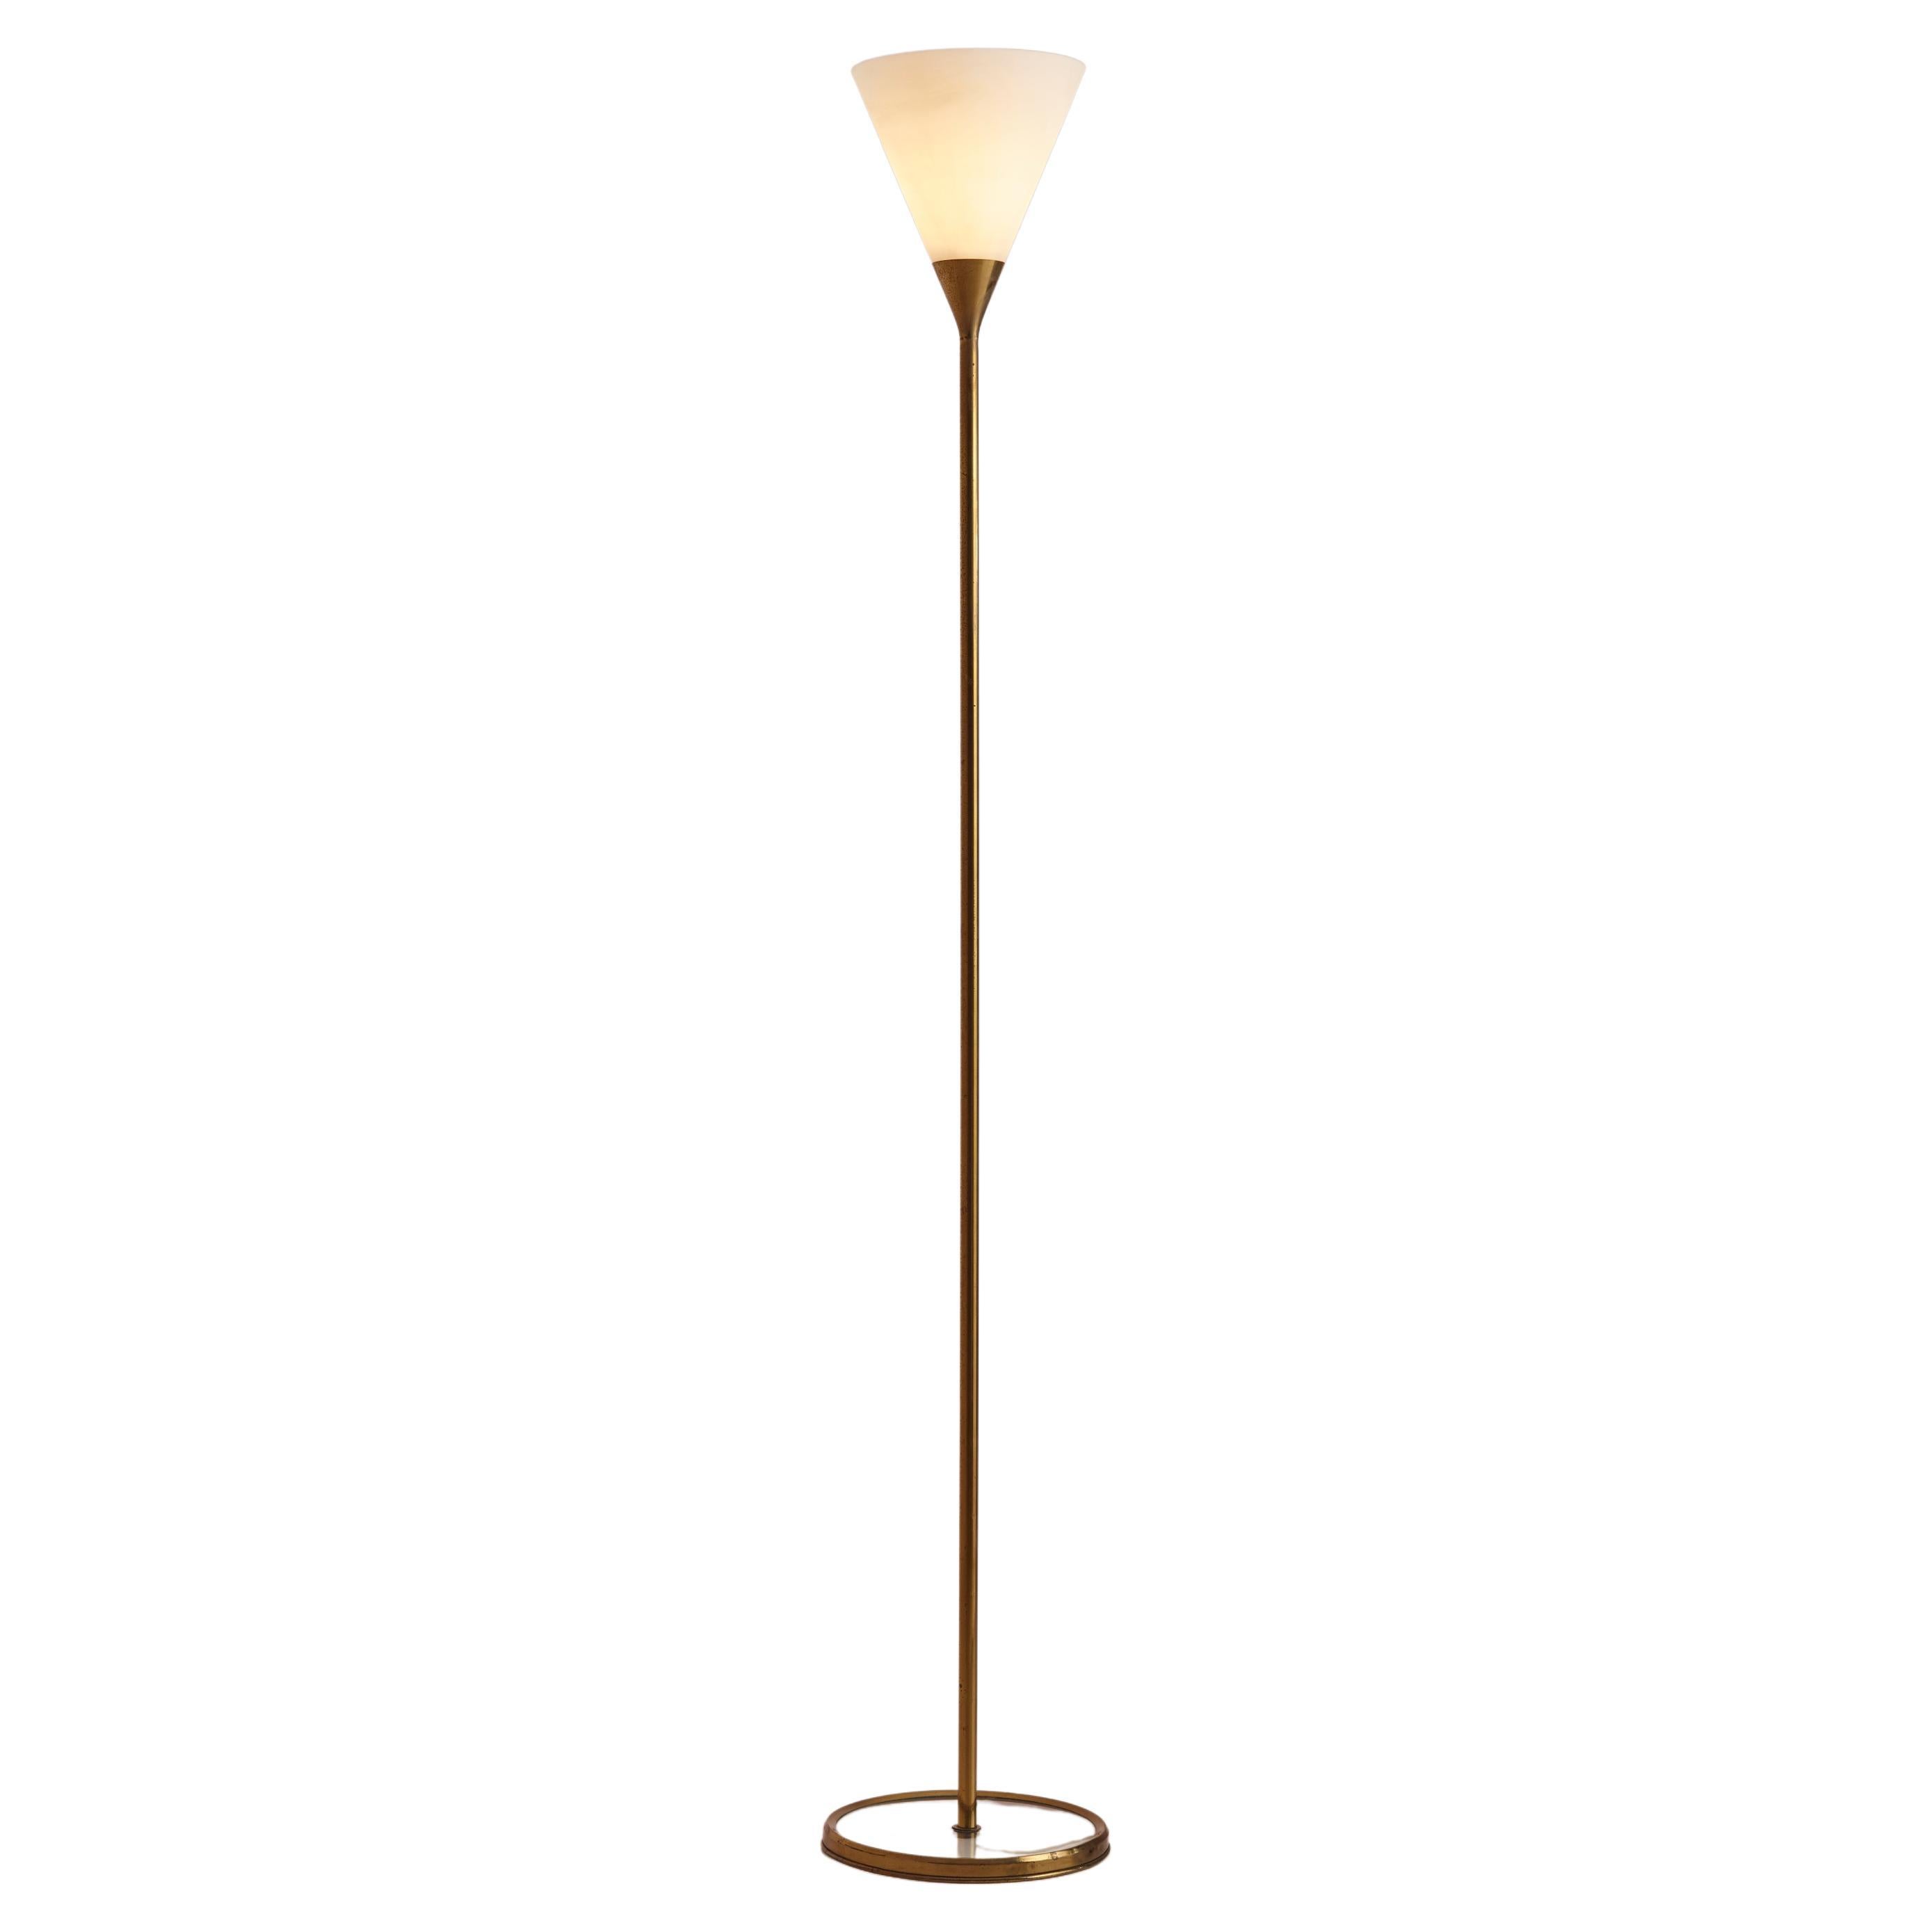 Floor Lamp by Max Ingrand Model 2003 for Fontana Arte, Made in Glass and Brass